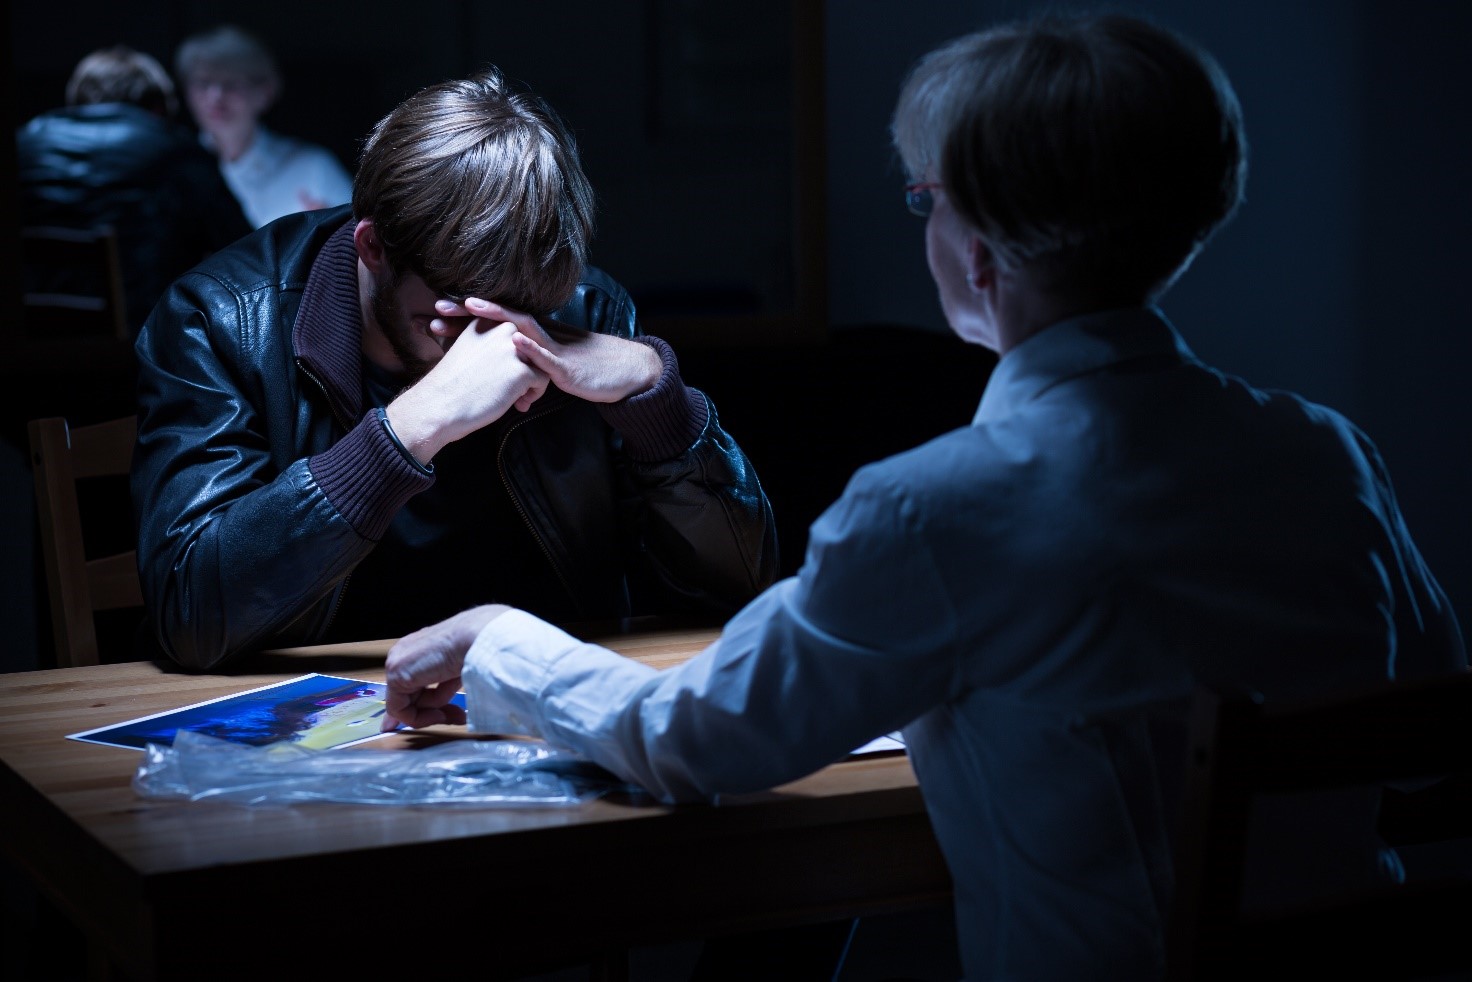 Image of a police interview. A woman police officer is interviewing a male who is holding his head in his hands. The officer is pointing to a picture on the table.